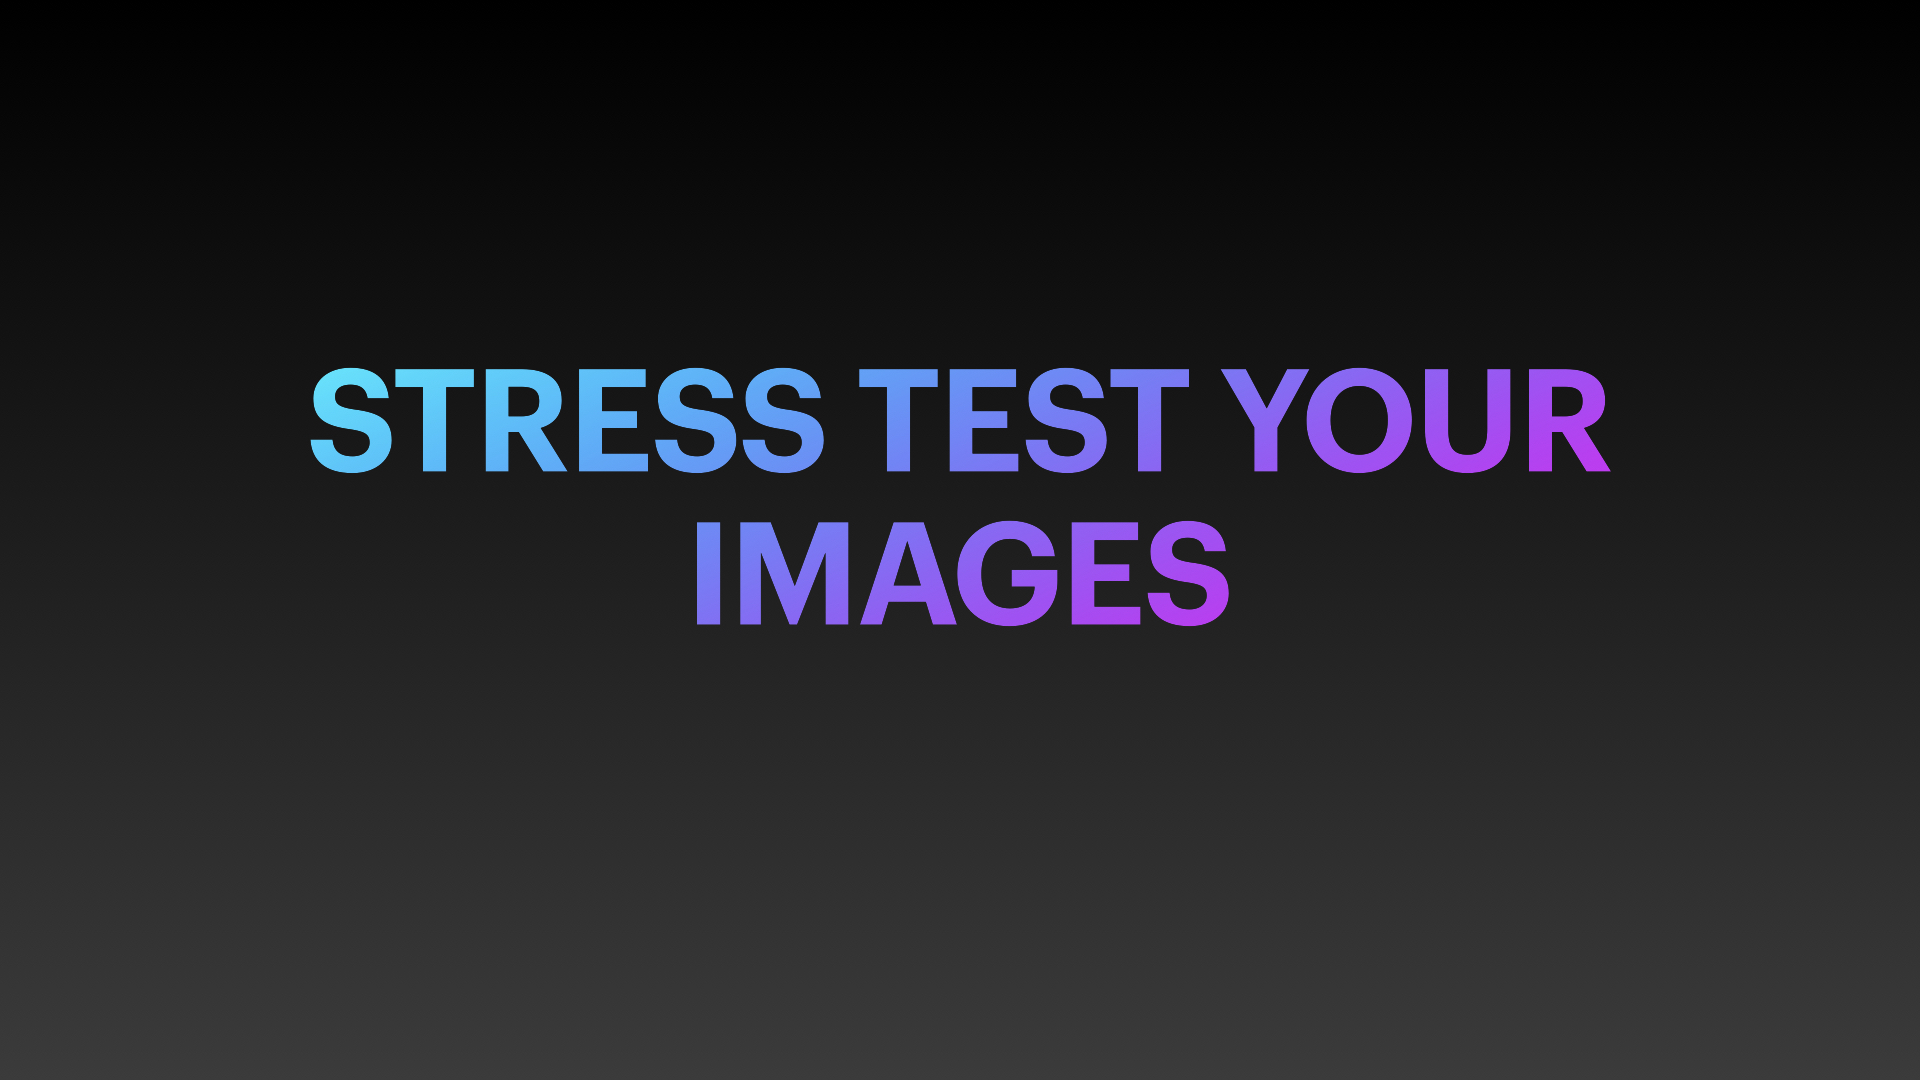 Stress test your images